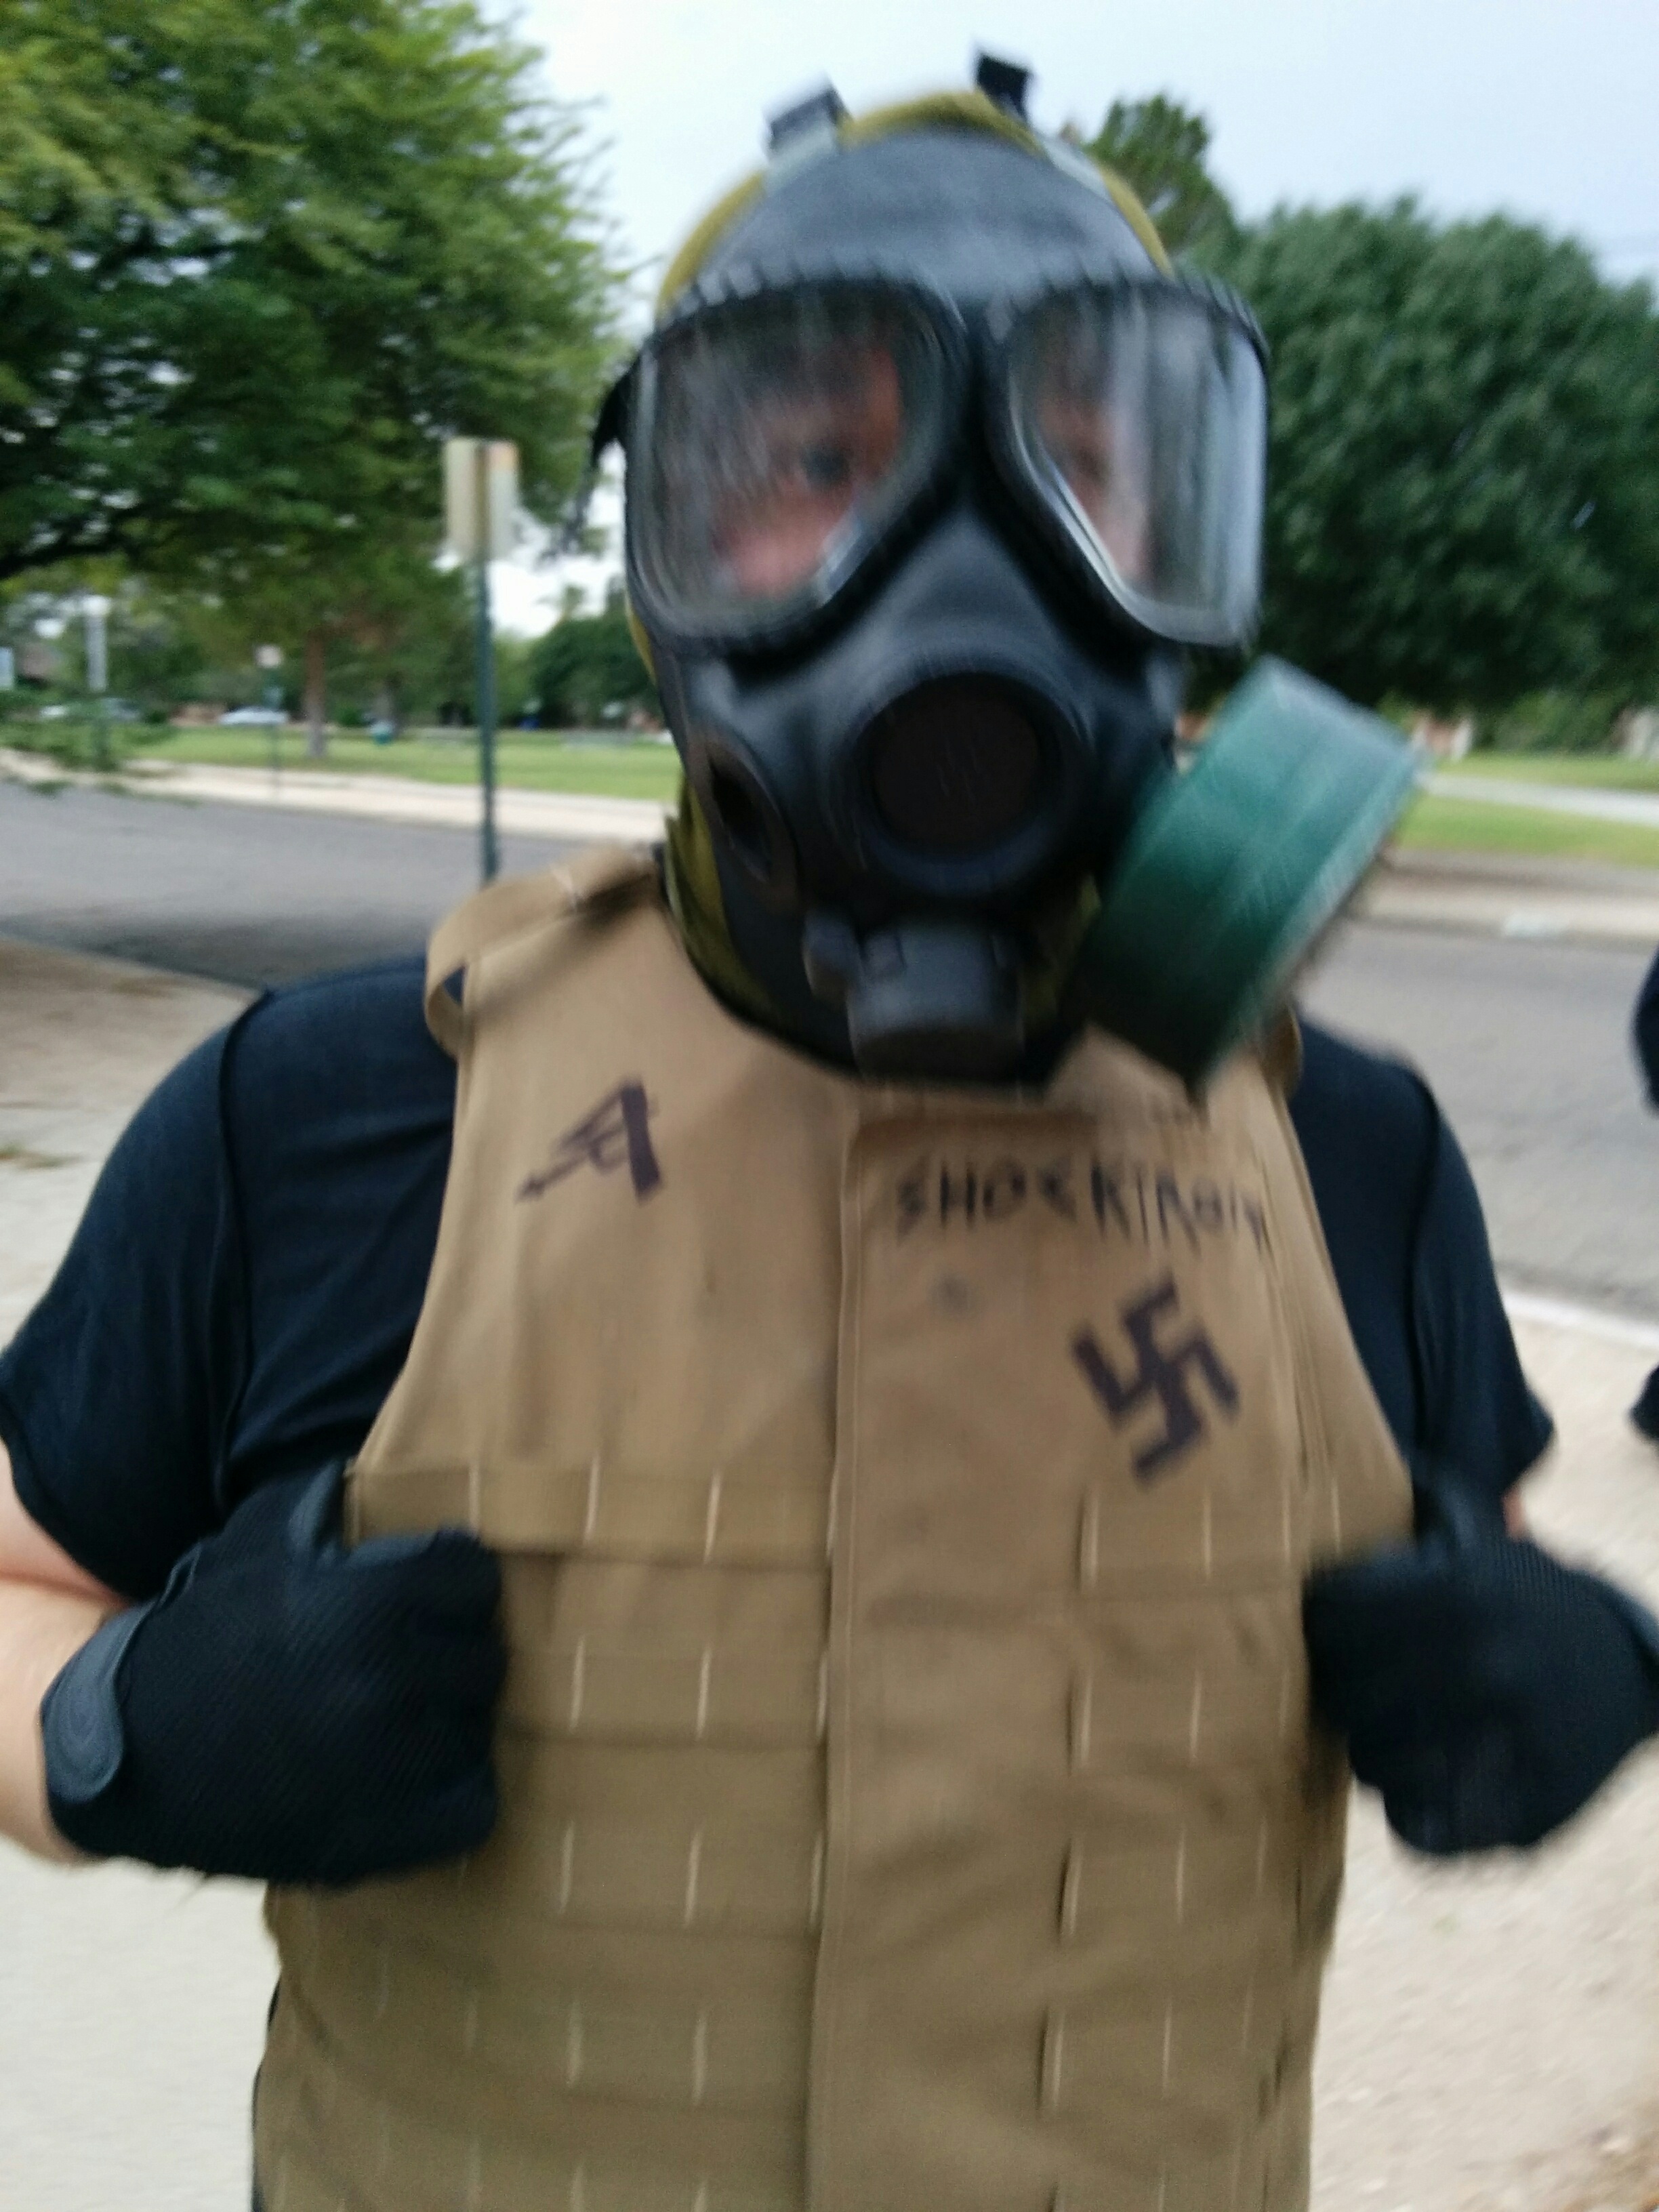 Close up of the Nazi in the gas mask, showing a swastika and the words I AM HATE sharpied on his flak jacket.